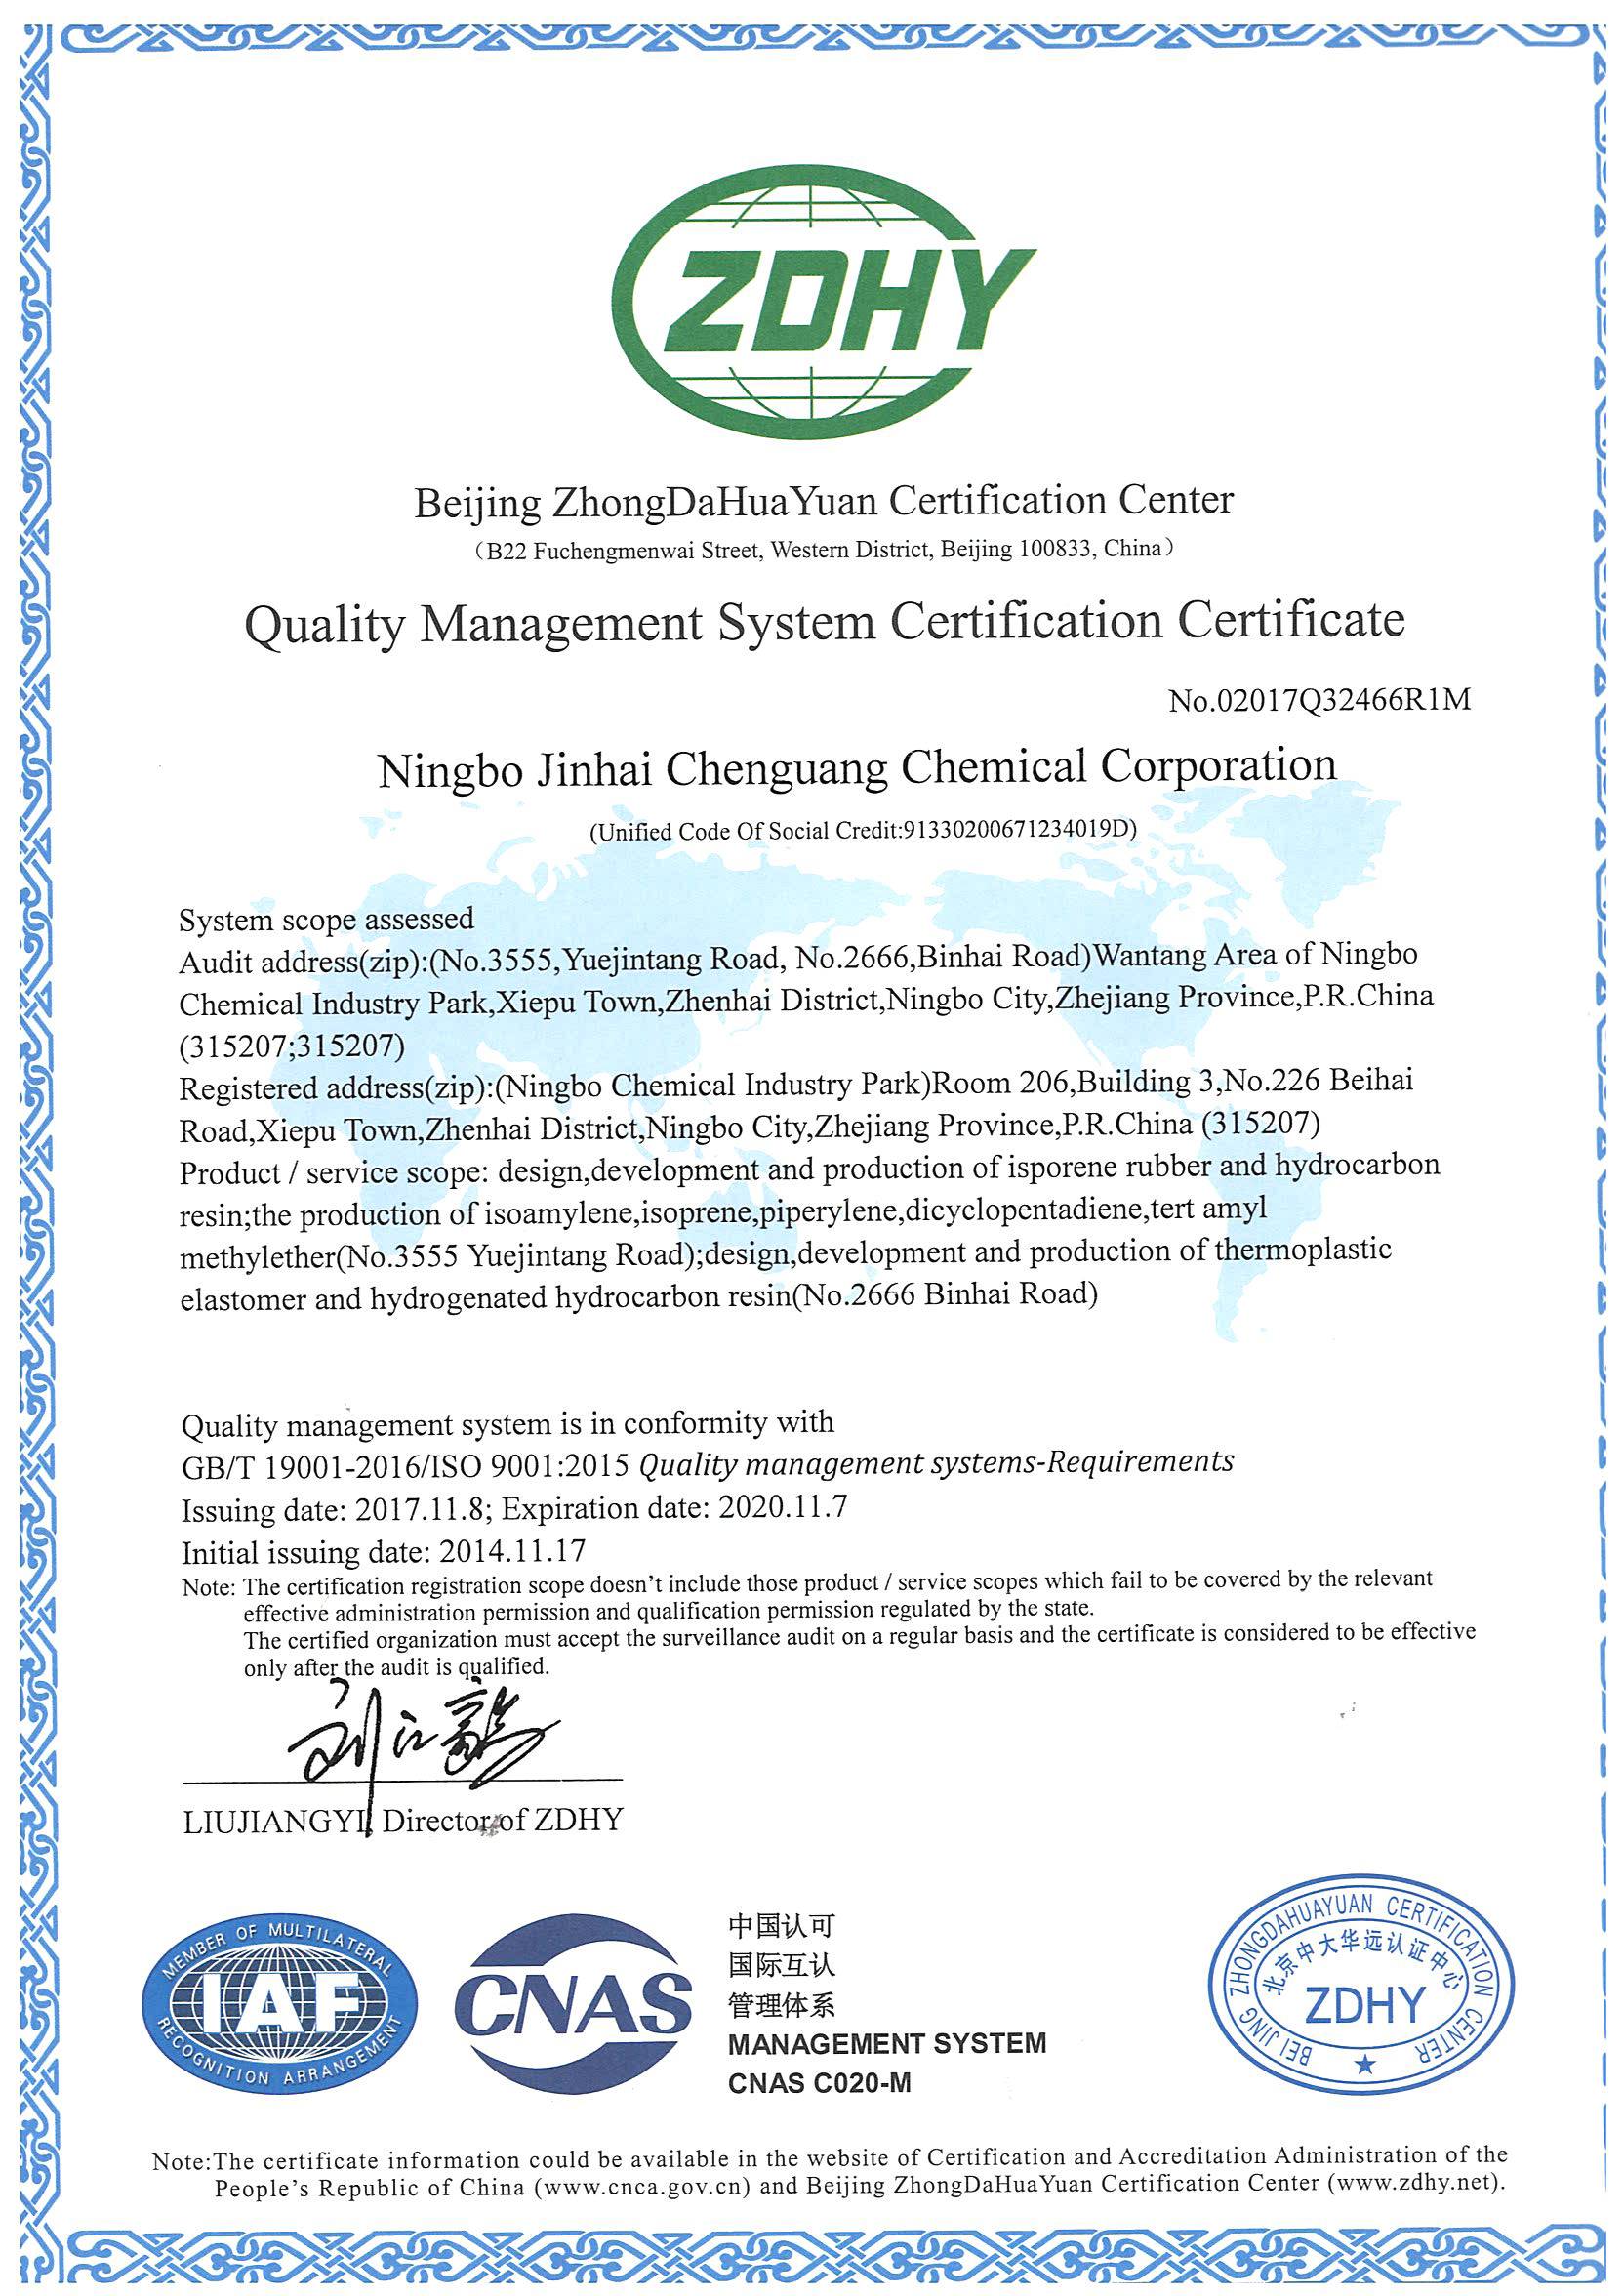 ZDHY Certification